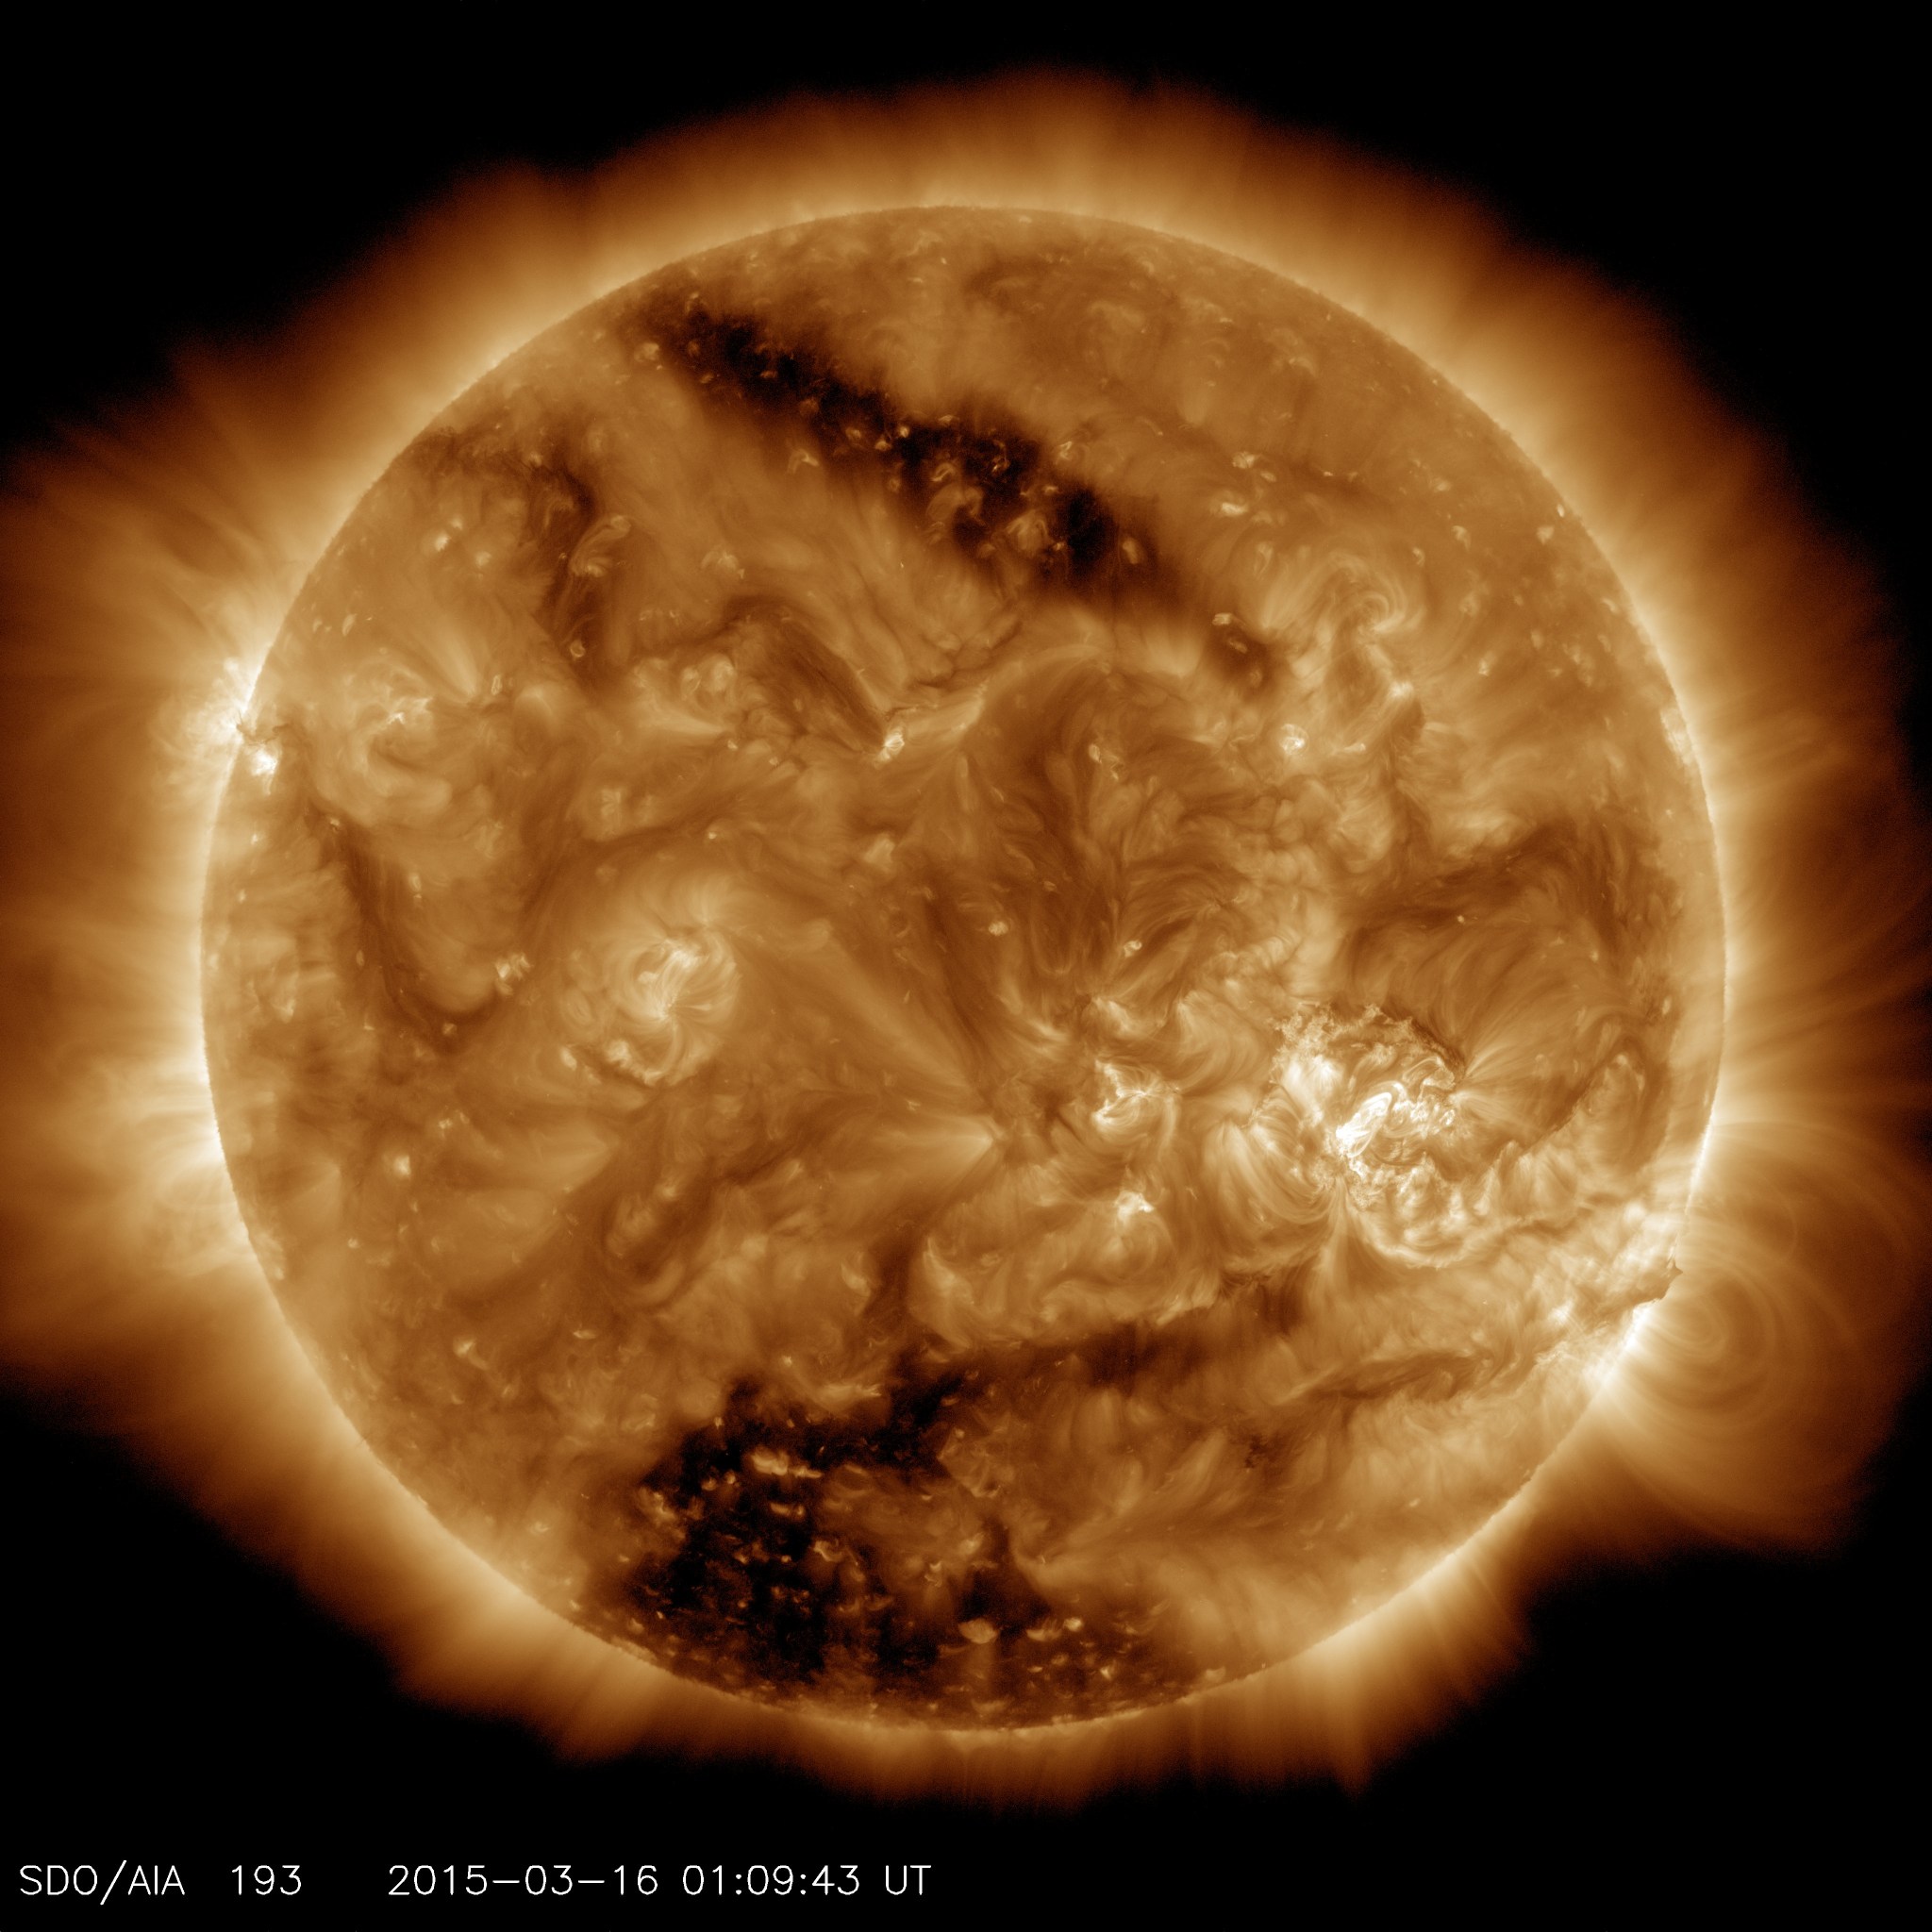 Two coronal hole, the two dark areas, on the Sun as seen by SDO. The Sun glows a pale orange with swirls of lighter yellow.